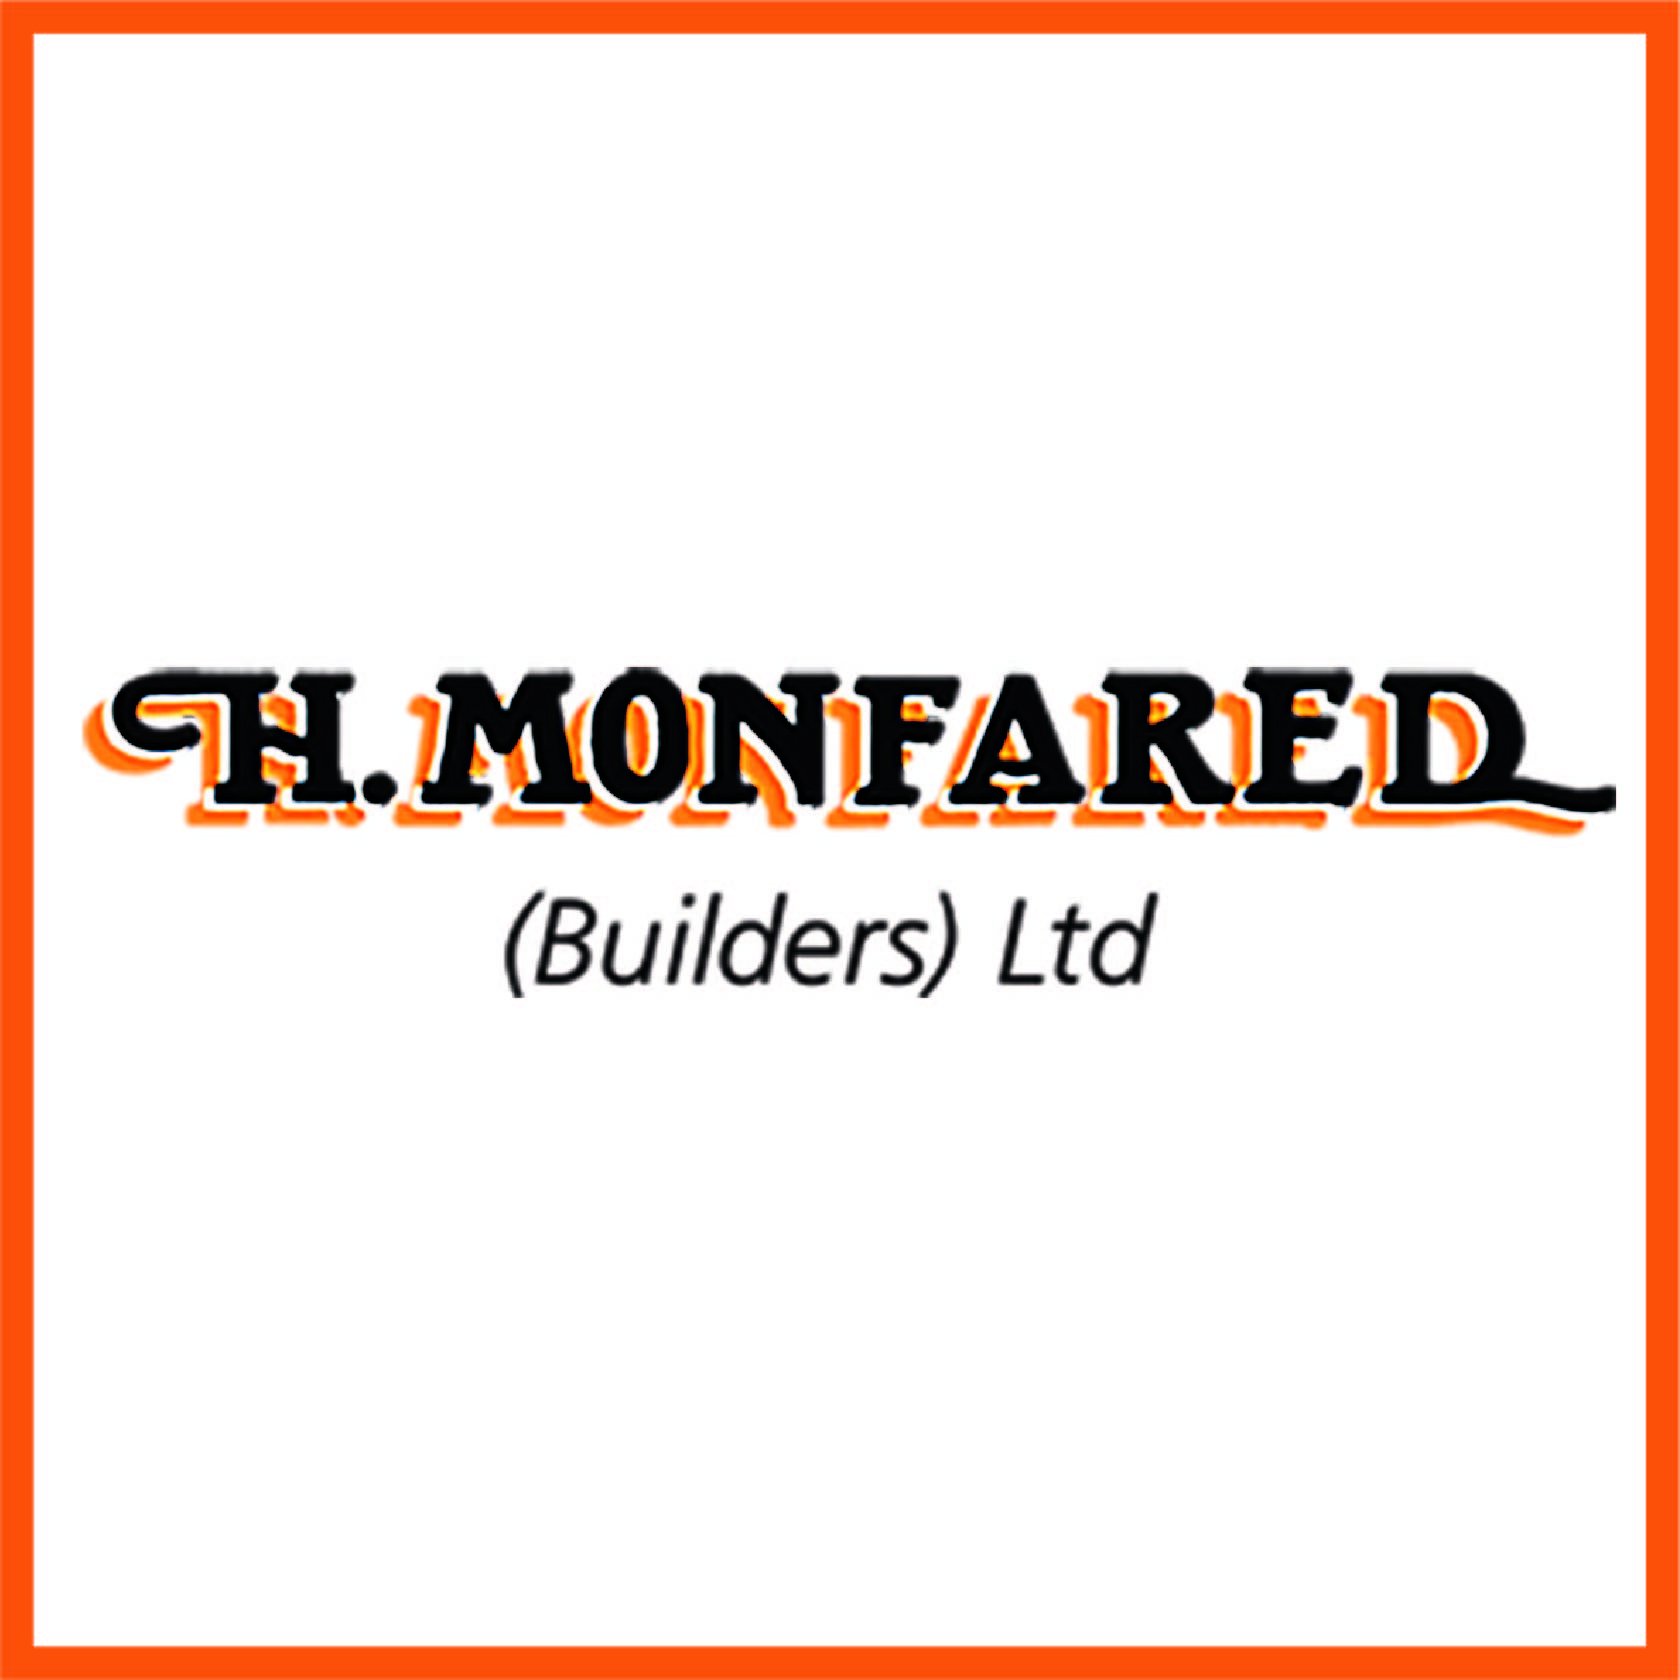 H.Monfared (Builders) Ltd, Hampshire's family run building business, with over 30 years experience. #Builders #Portsmouth #Hampshire #Renovations #Southsea